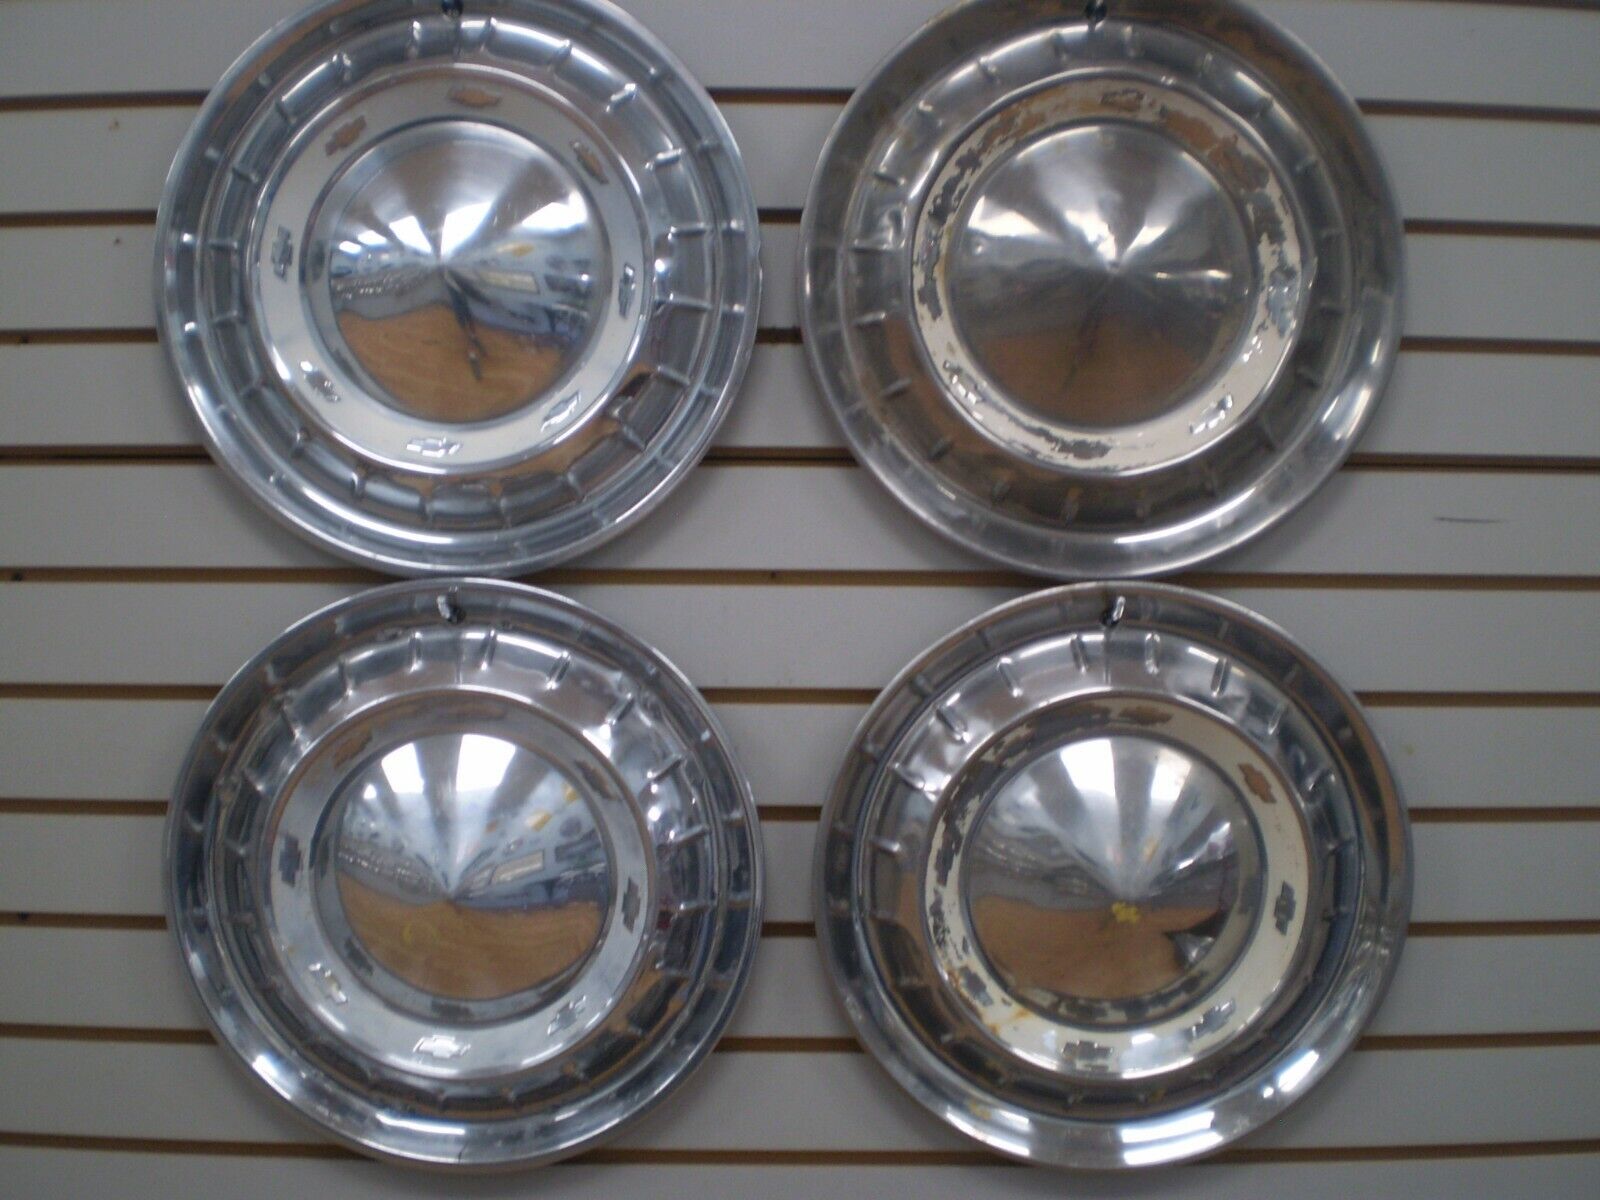 1955 CHEVROLET BEL AIR Wheelcover WHEEL COVERS Hubcaps OEM SET 55